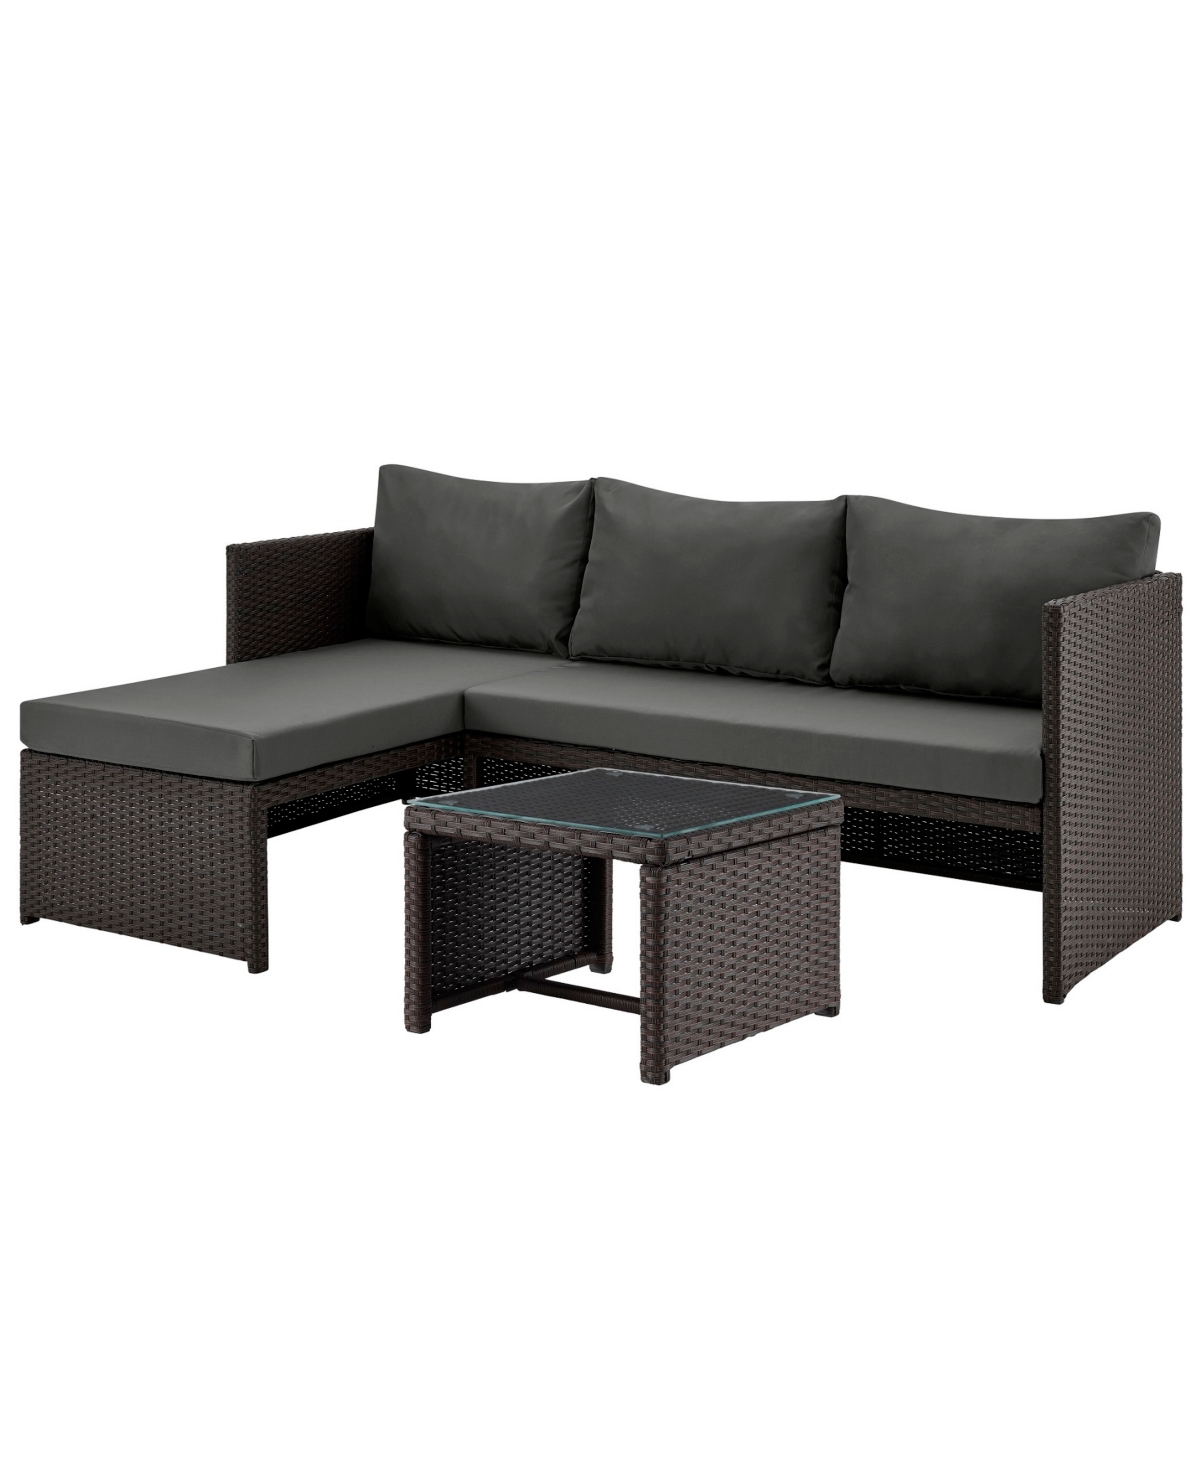 Manhattan Comfort 74" Menton Steel Polyester Upholstered 2-seater And Lounge Chair With Coffee Table In Brown And Gray